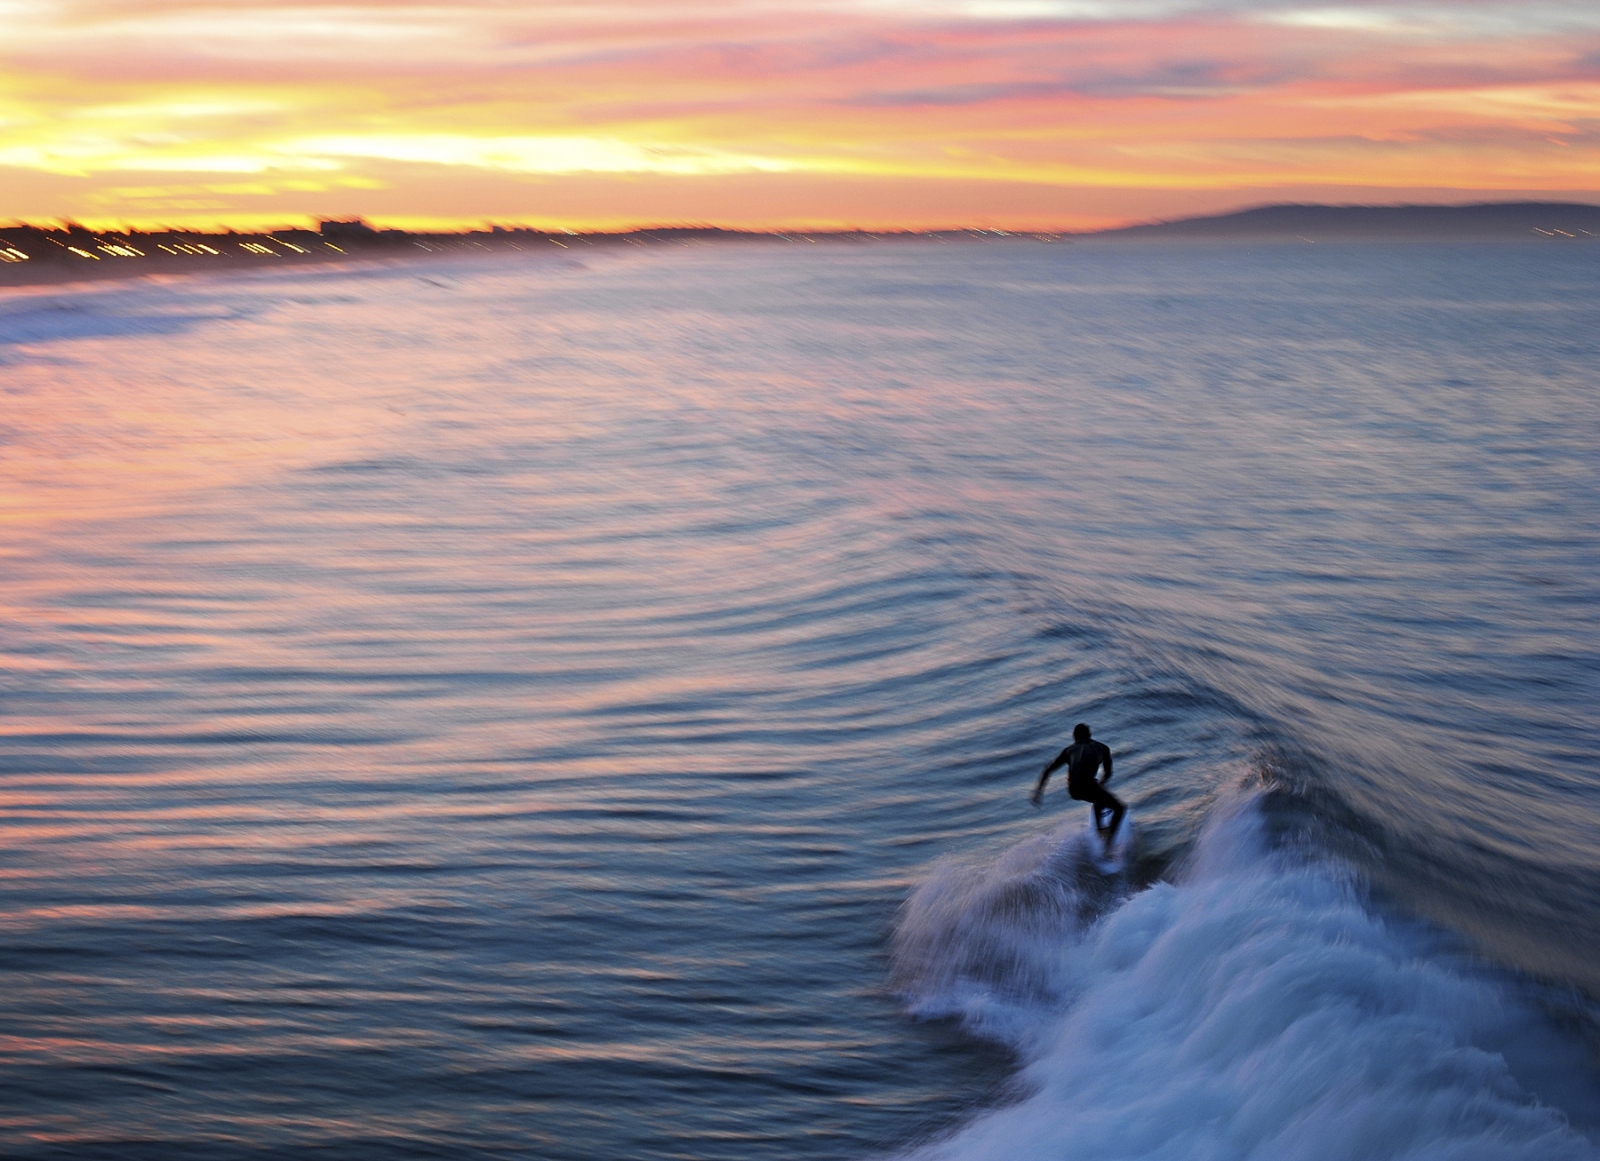 A surfer catches a wave in the early morning near the Santa Monica Pier in December 2016.